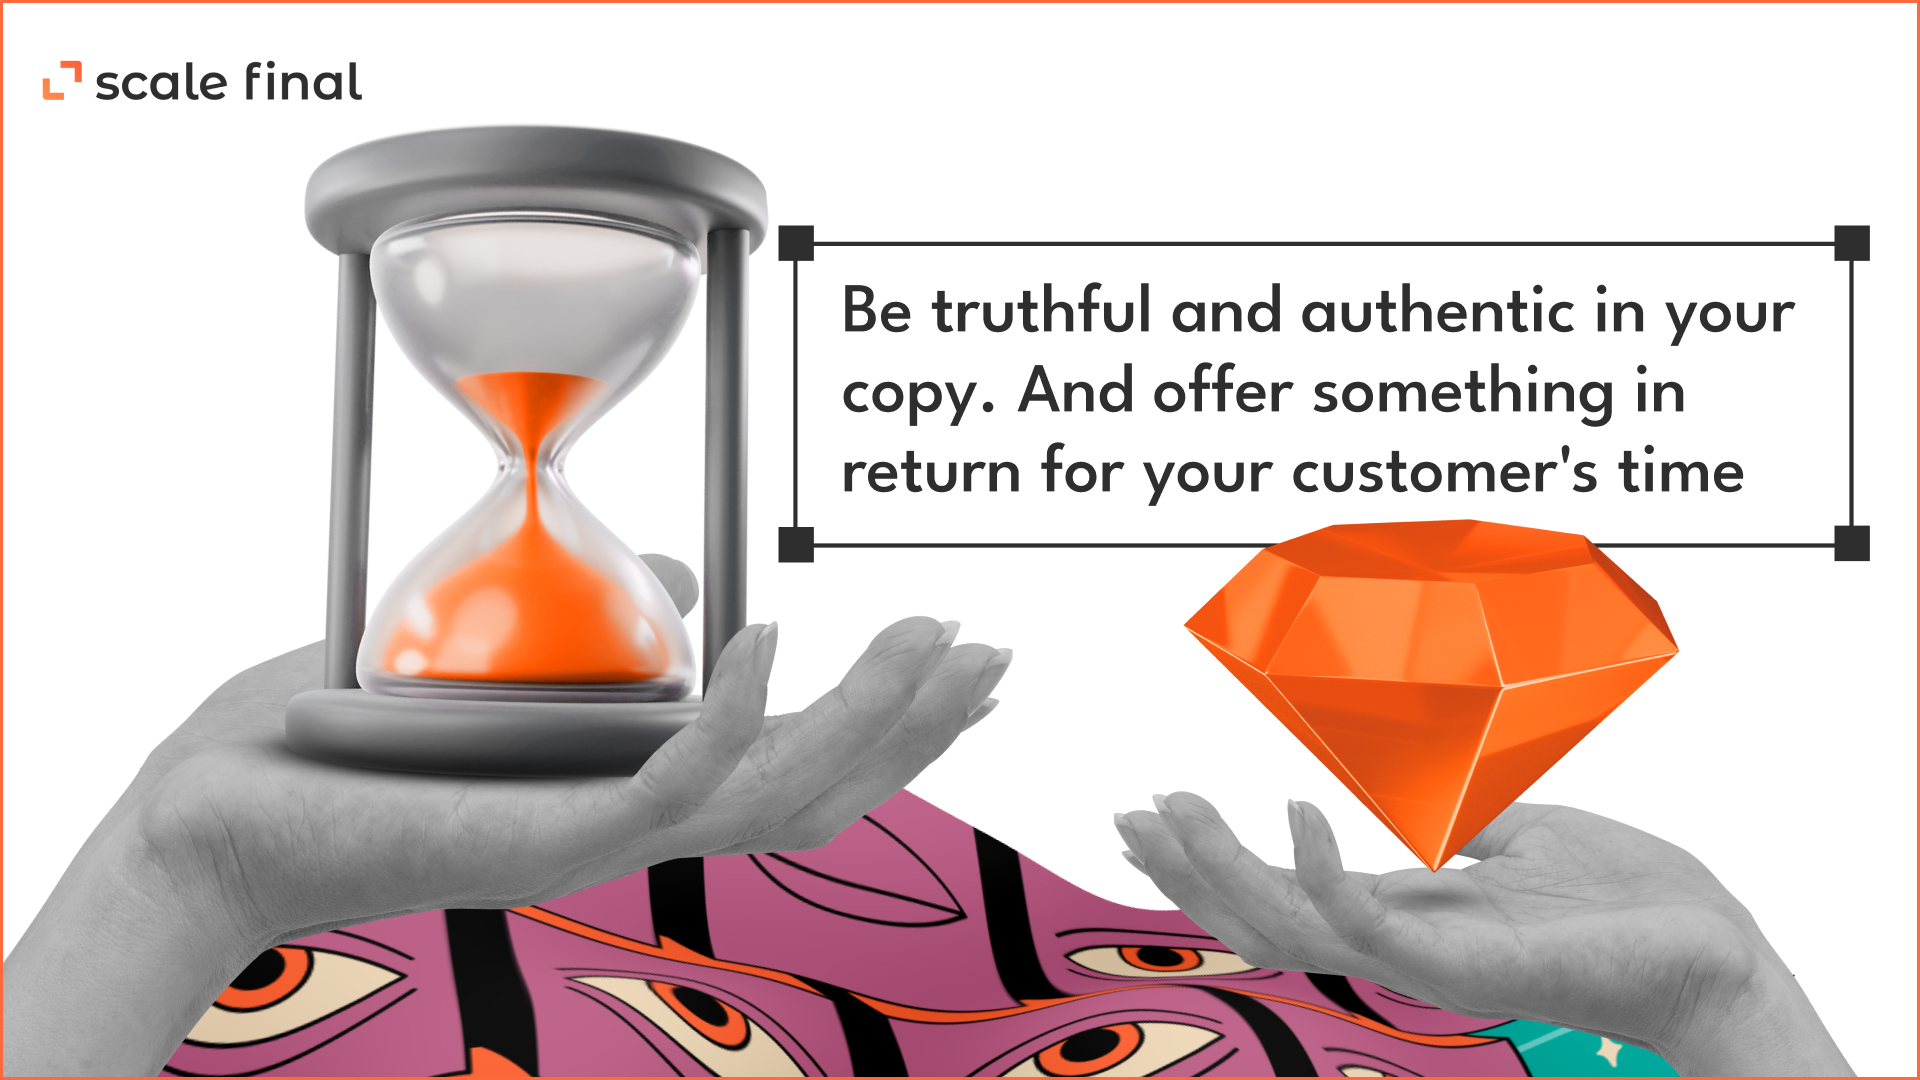 Be truthful and authentic in your copy. And offer something in return for your customer's time.